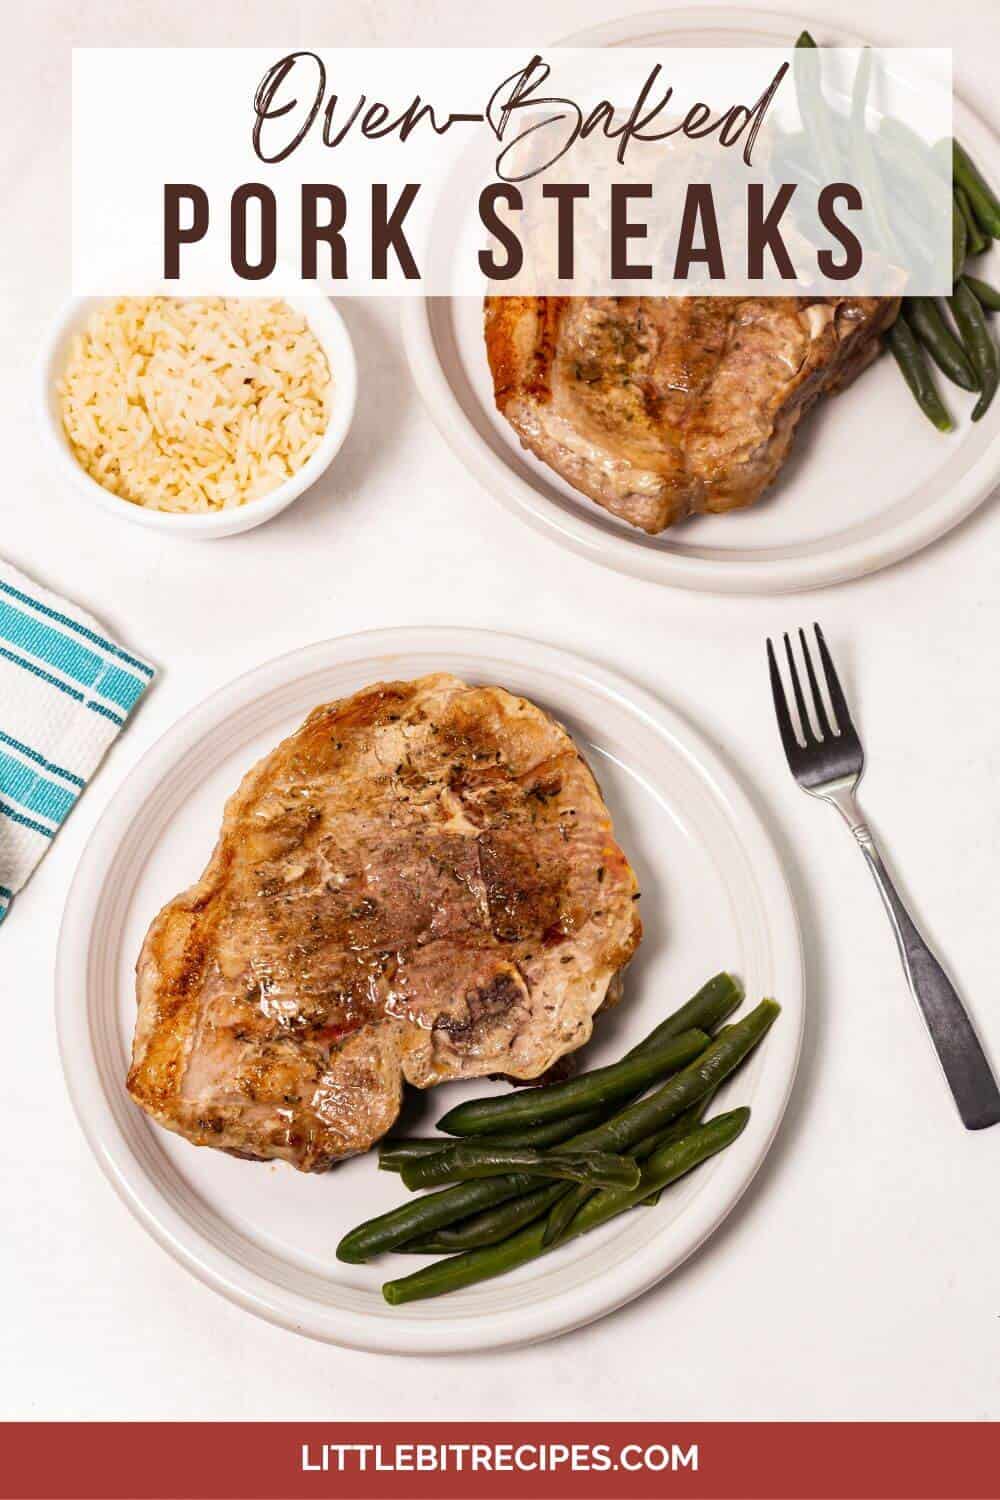 oven baked pork steaks with text.